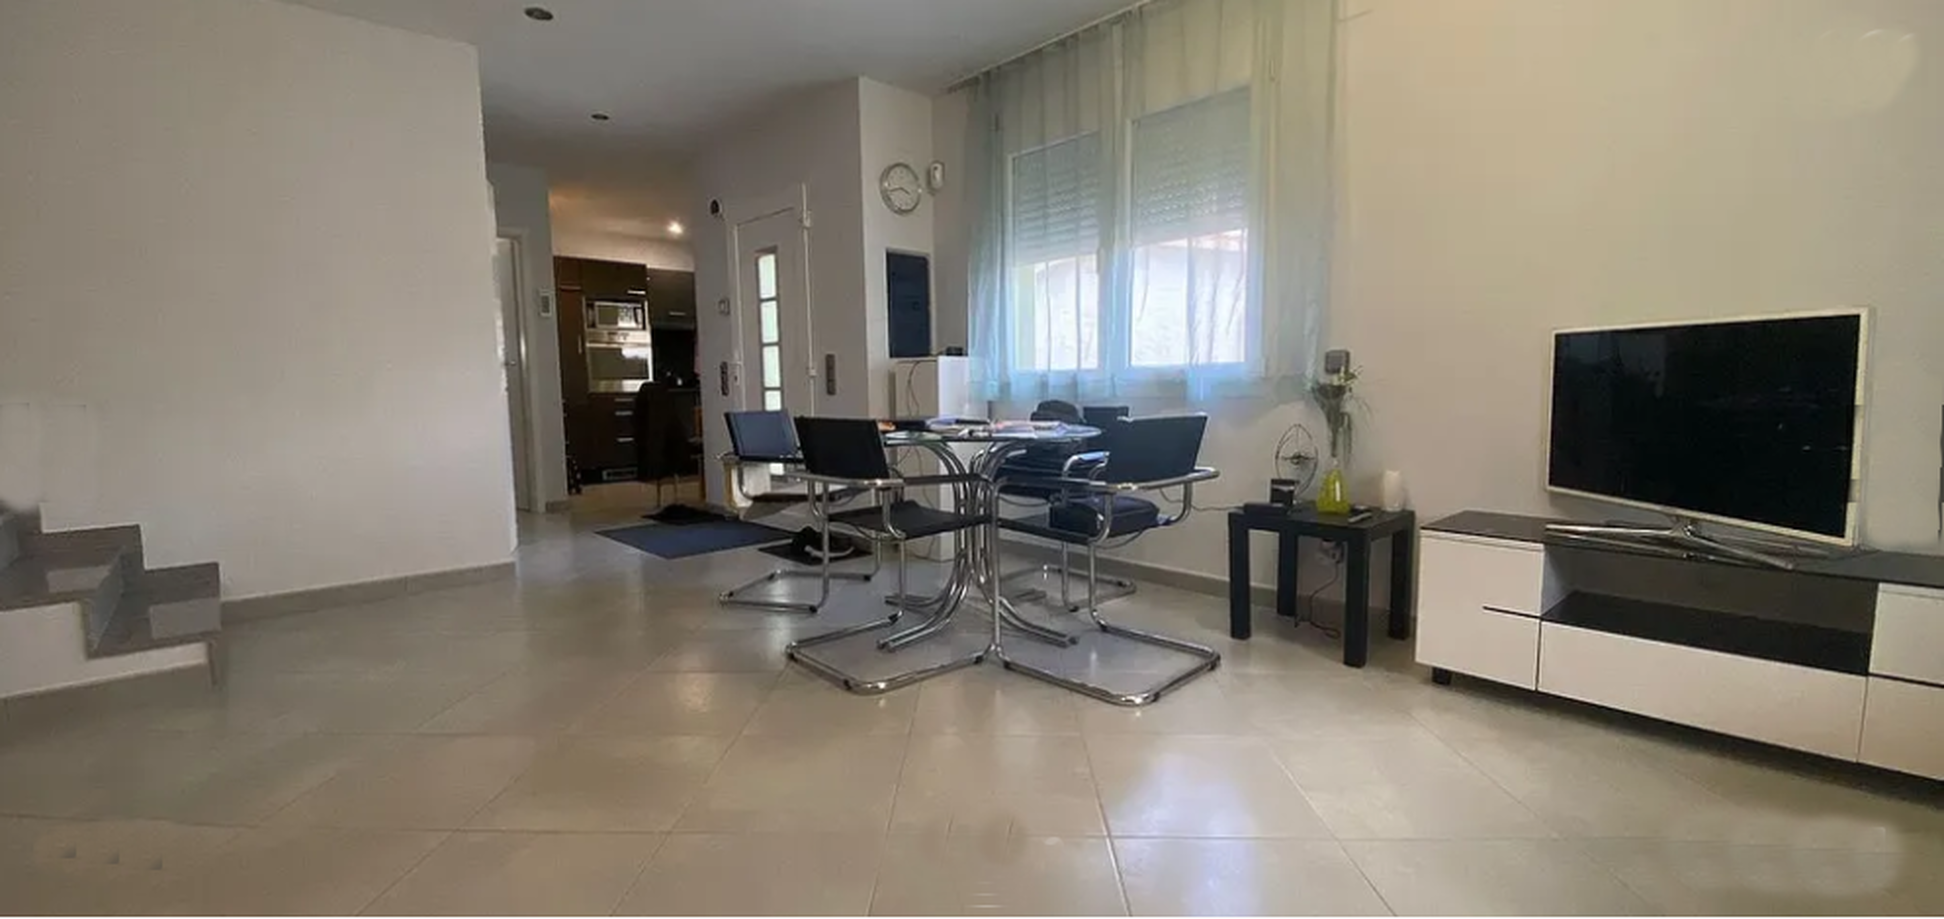 Renovated house with a studio for sale in Empuriabrava